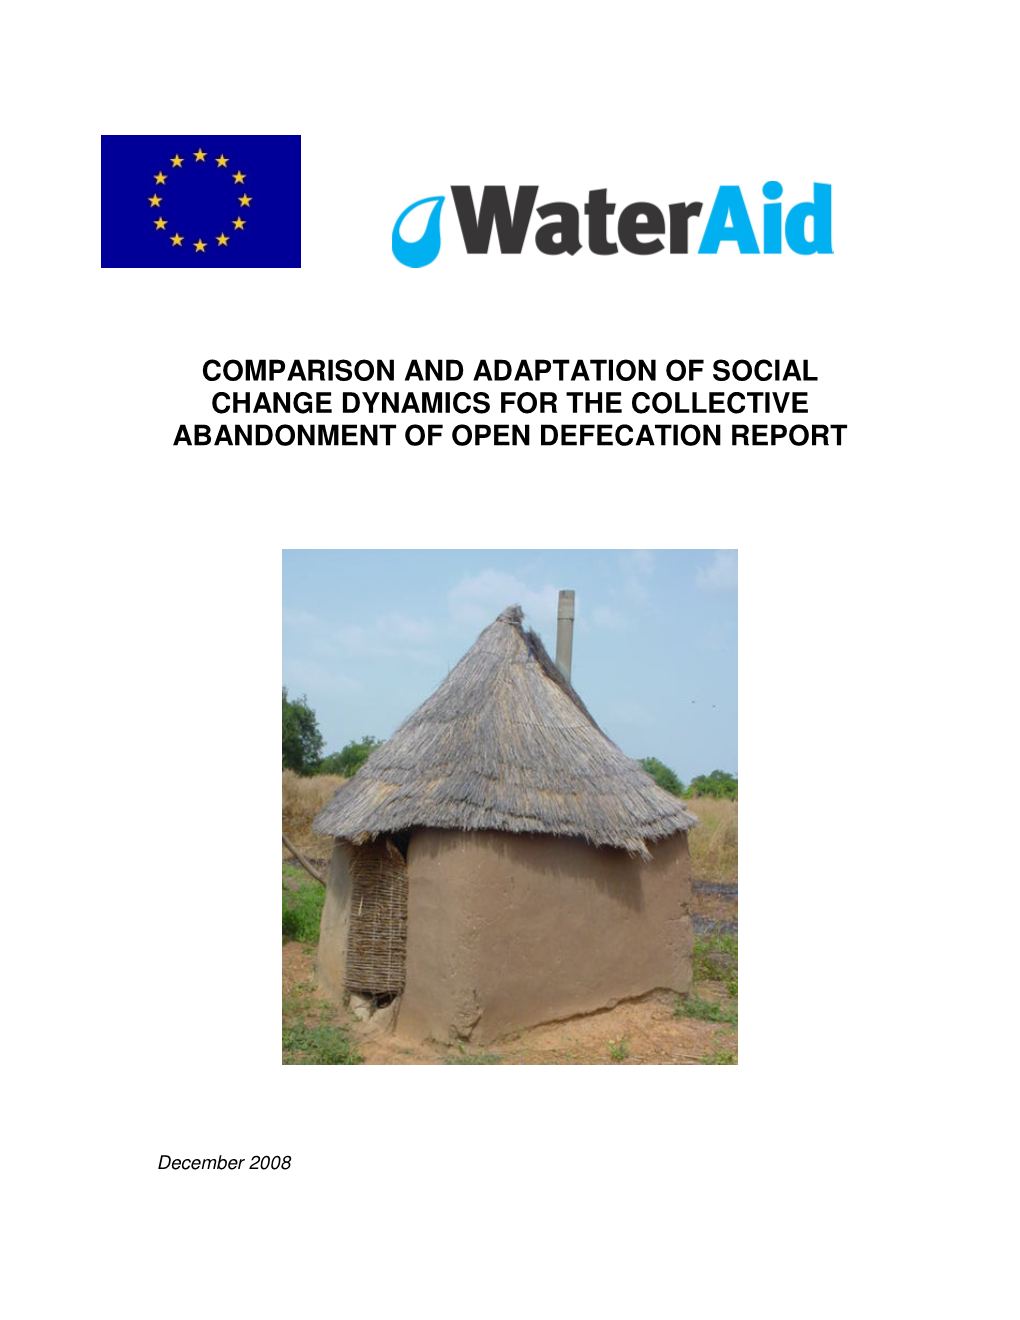 Comparison and Adaptation of Social Change Dynamics for the Collective Abandonment of Open Defecation Report